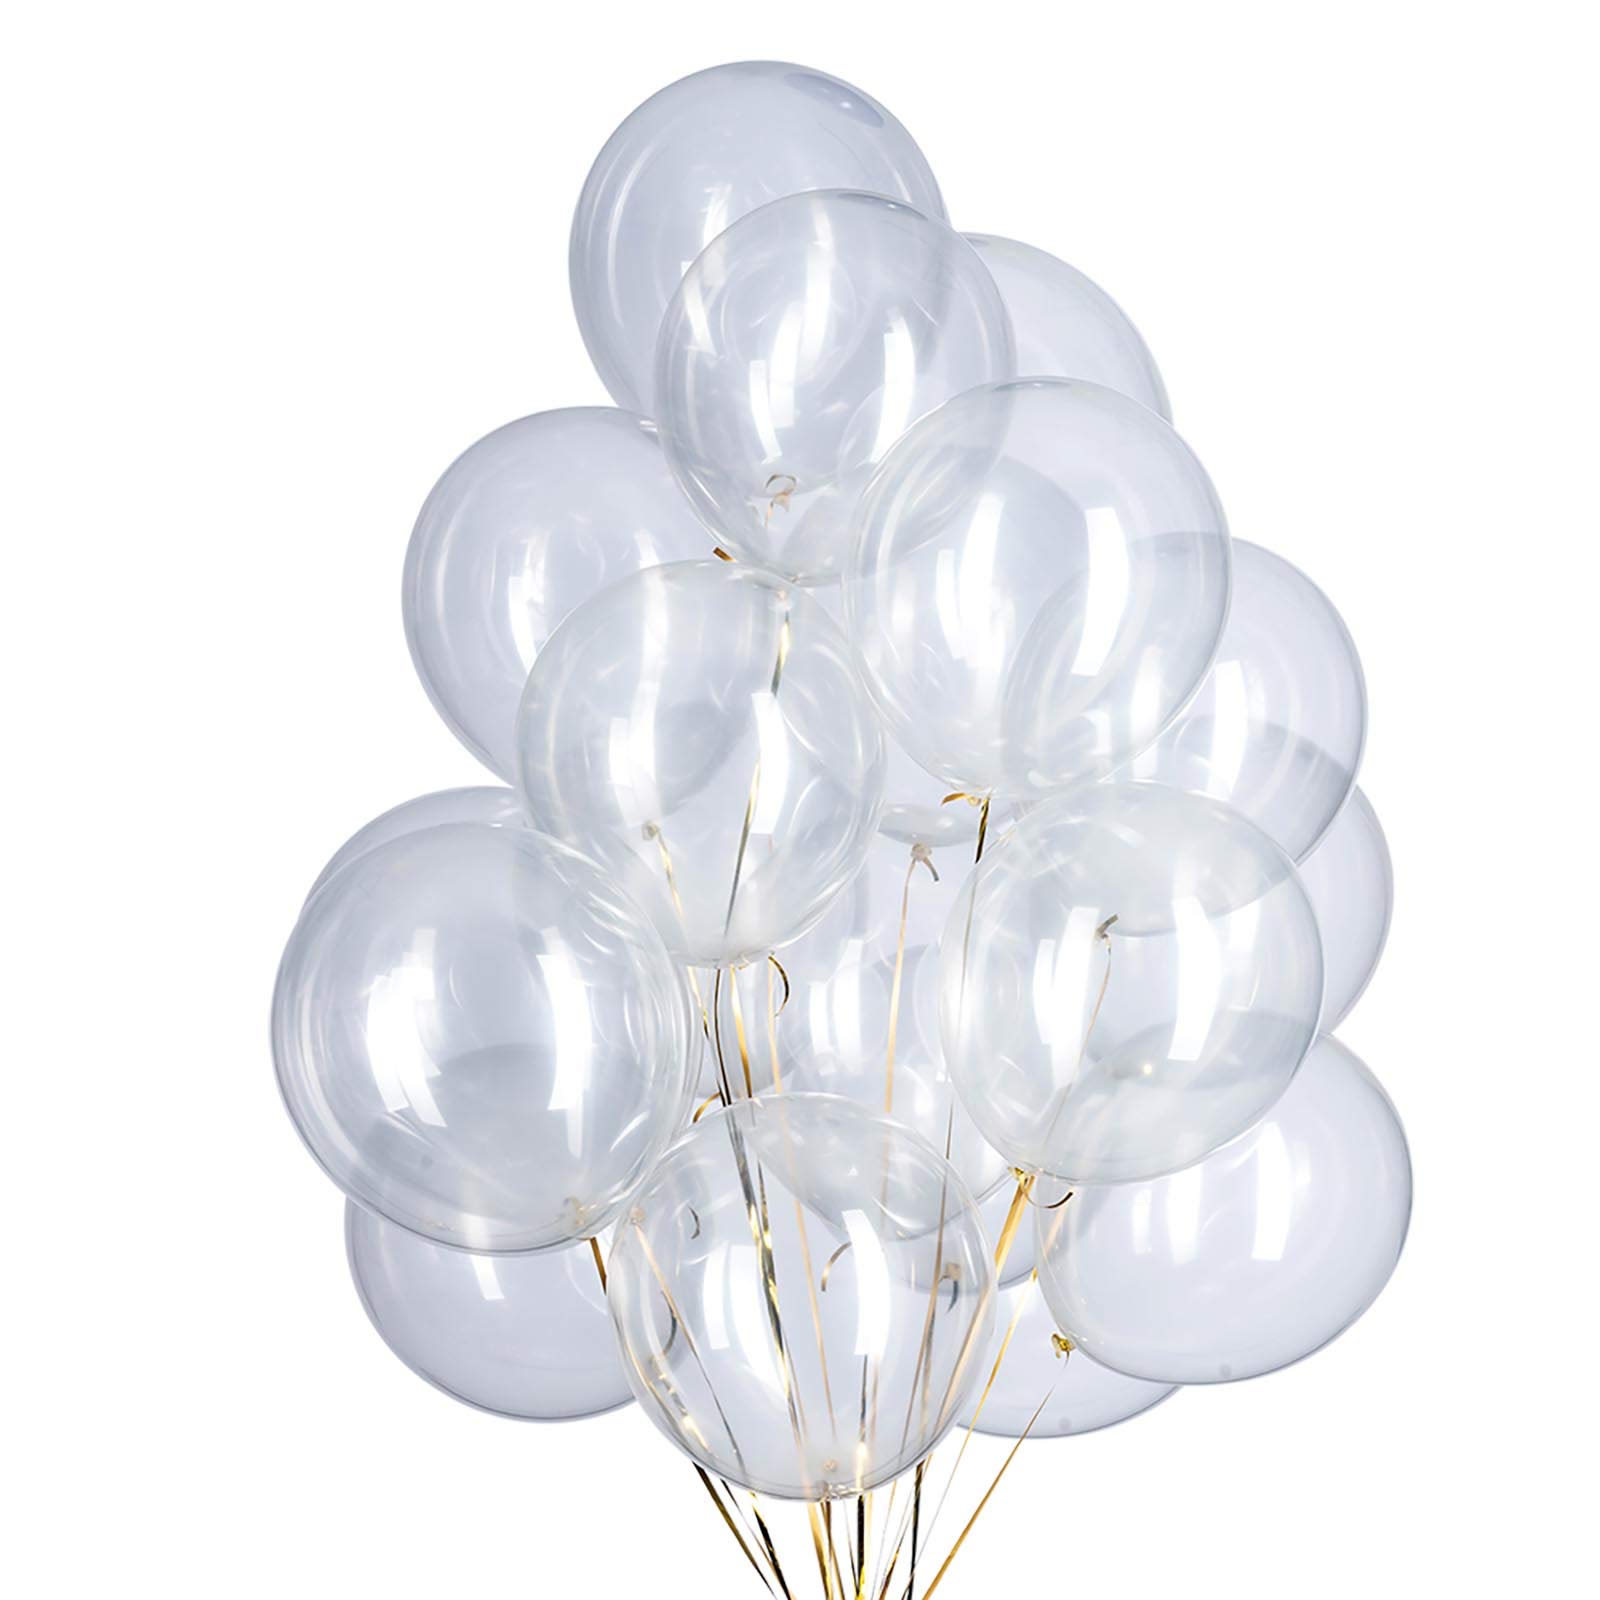 Book Cover GAKA 12 inch Clear Balloons Transparent Balloons Helium Balloons Quality Clear Latex Balloons Party Decorations Supplies Pack of 100